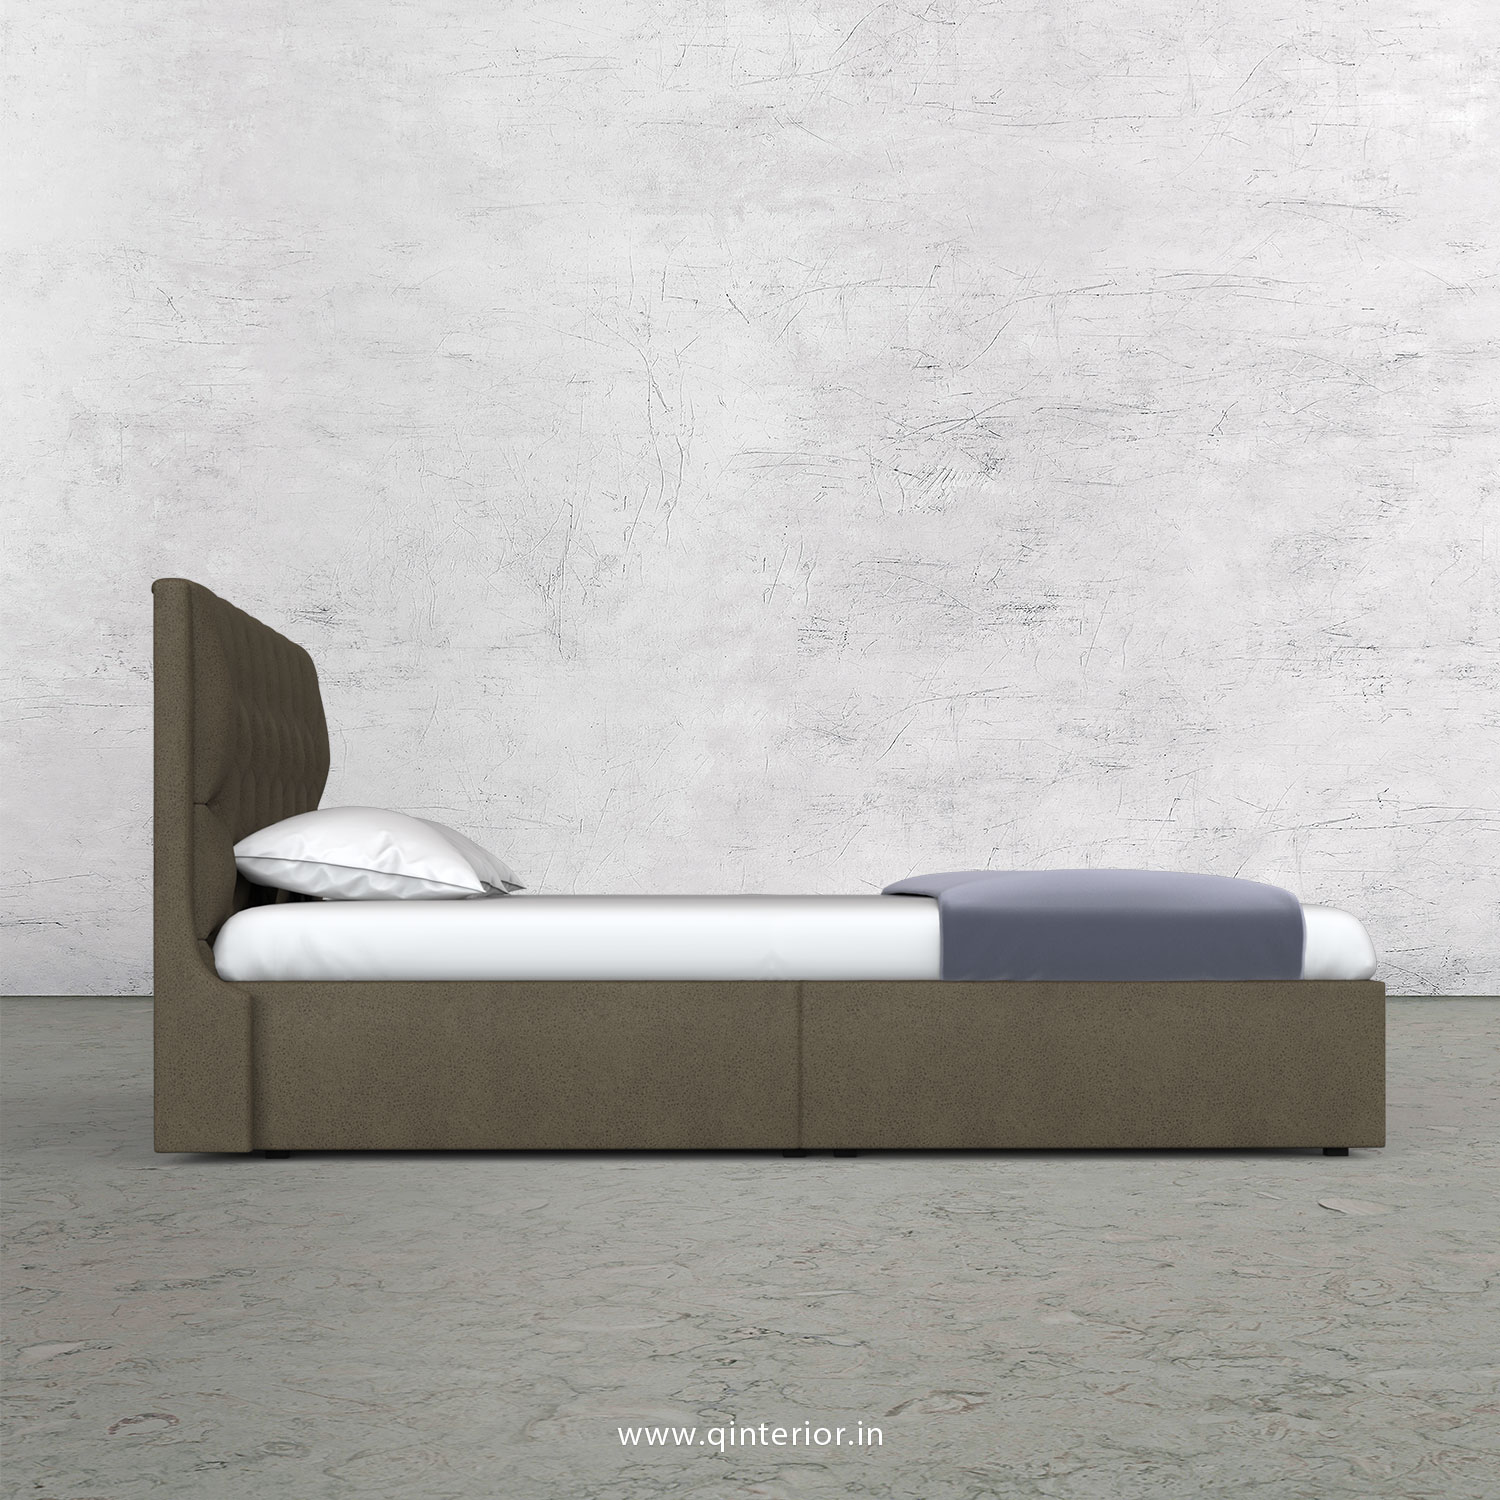 Scorpius King Size Storage Bed in Fab Leather Fabric - KBD001 FL06